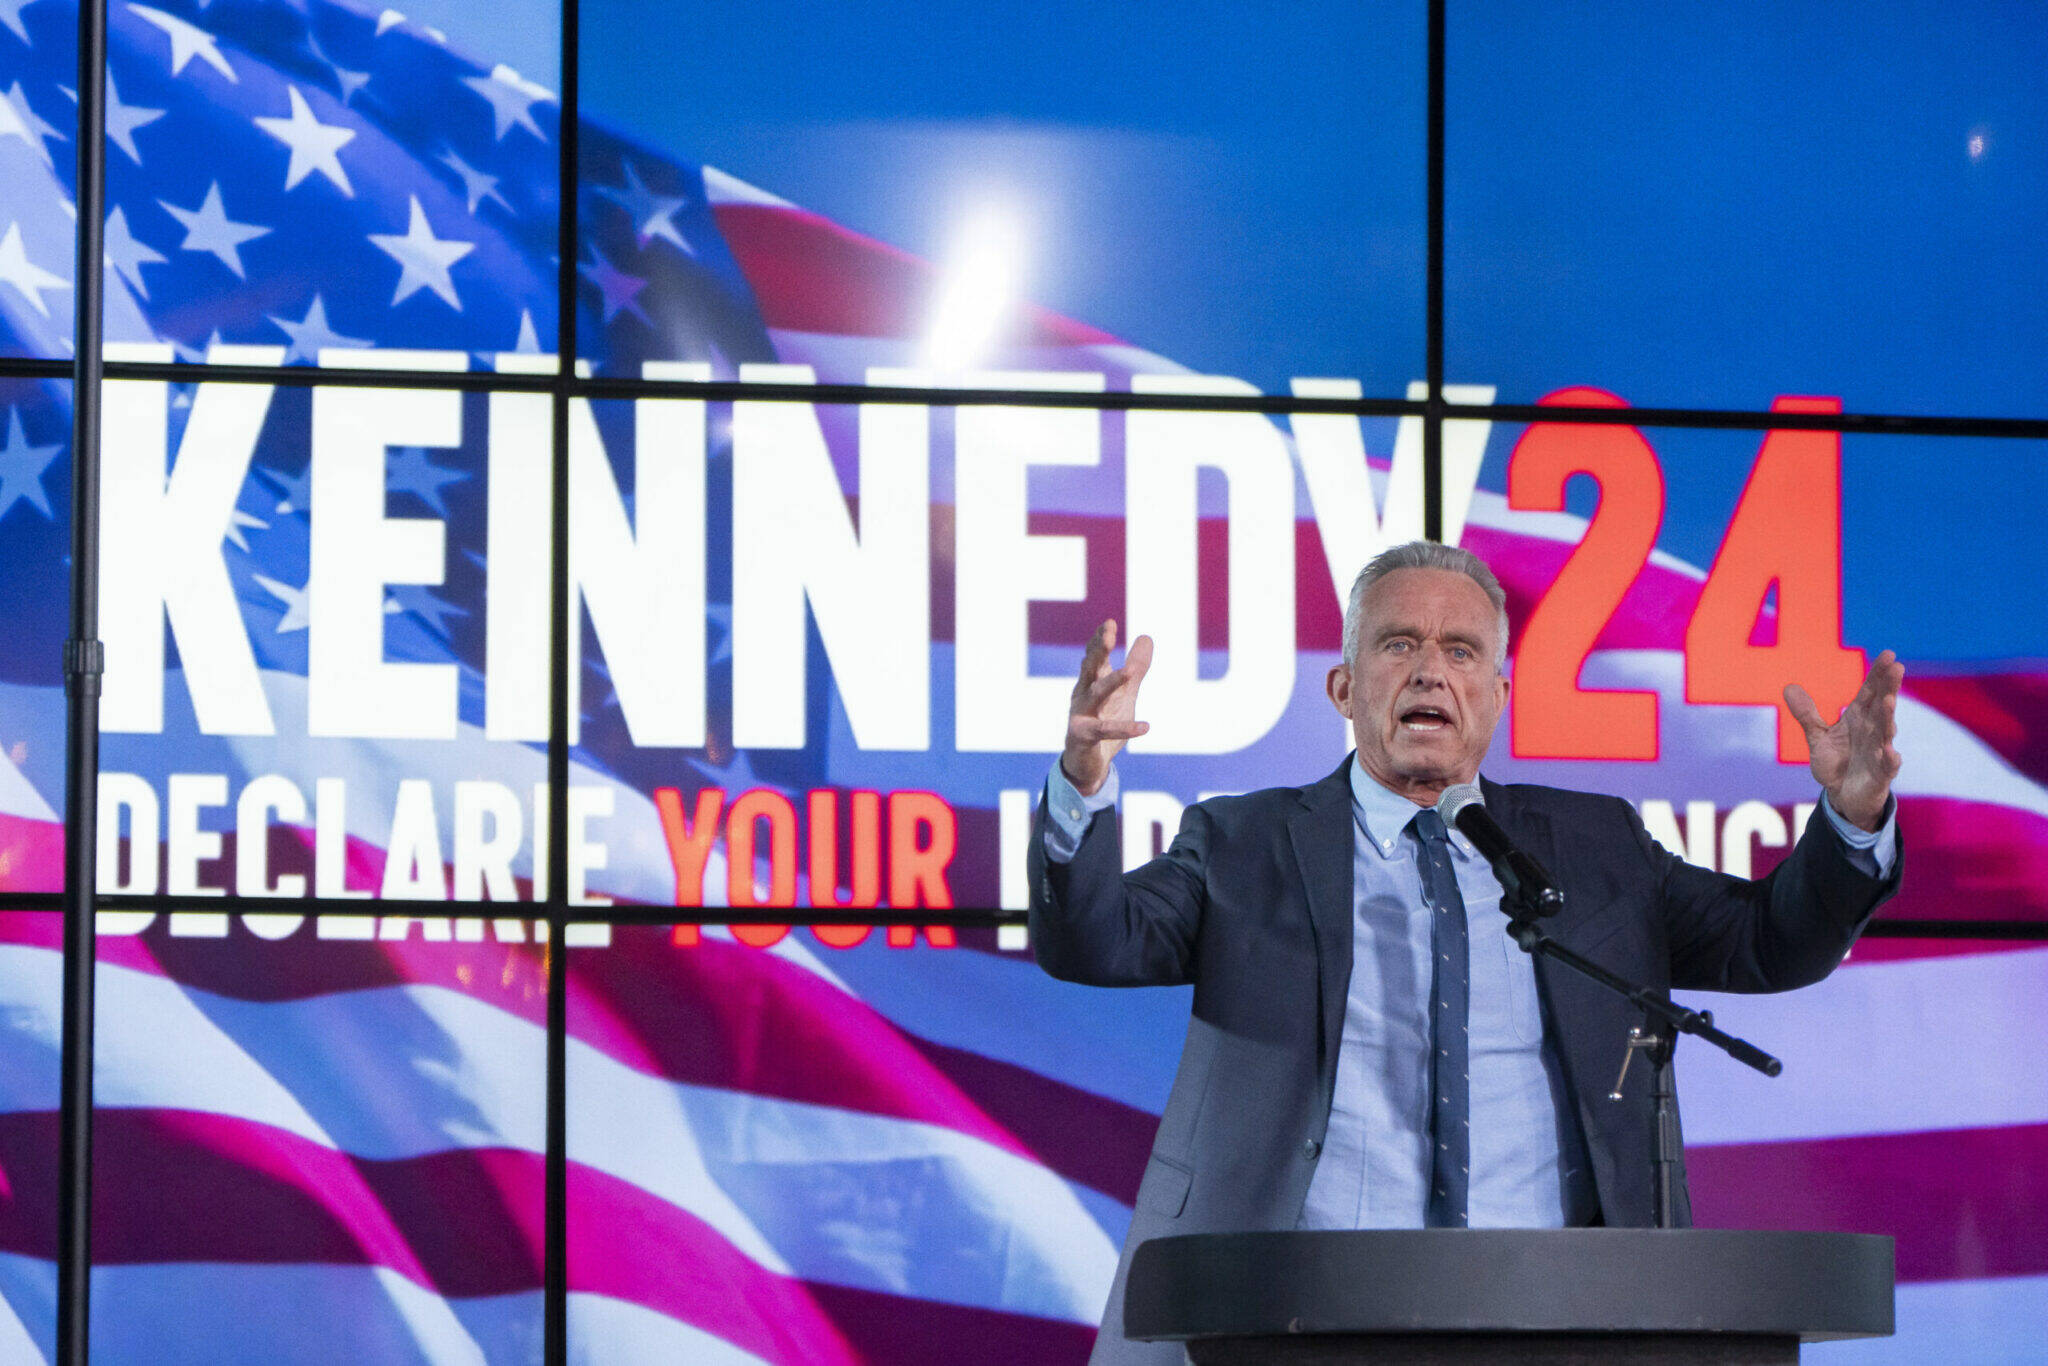 Independent Presidential candidate Robert F. Kennedy Jr. speaks during a campaign rally at Legends Event Center on Dec. 20, 2023, in Phoenix, Arizona. (Rebecca Noble/Getty Images)